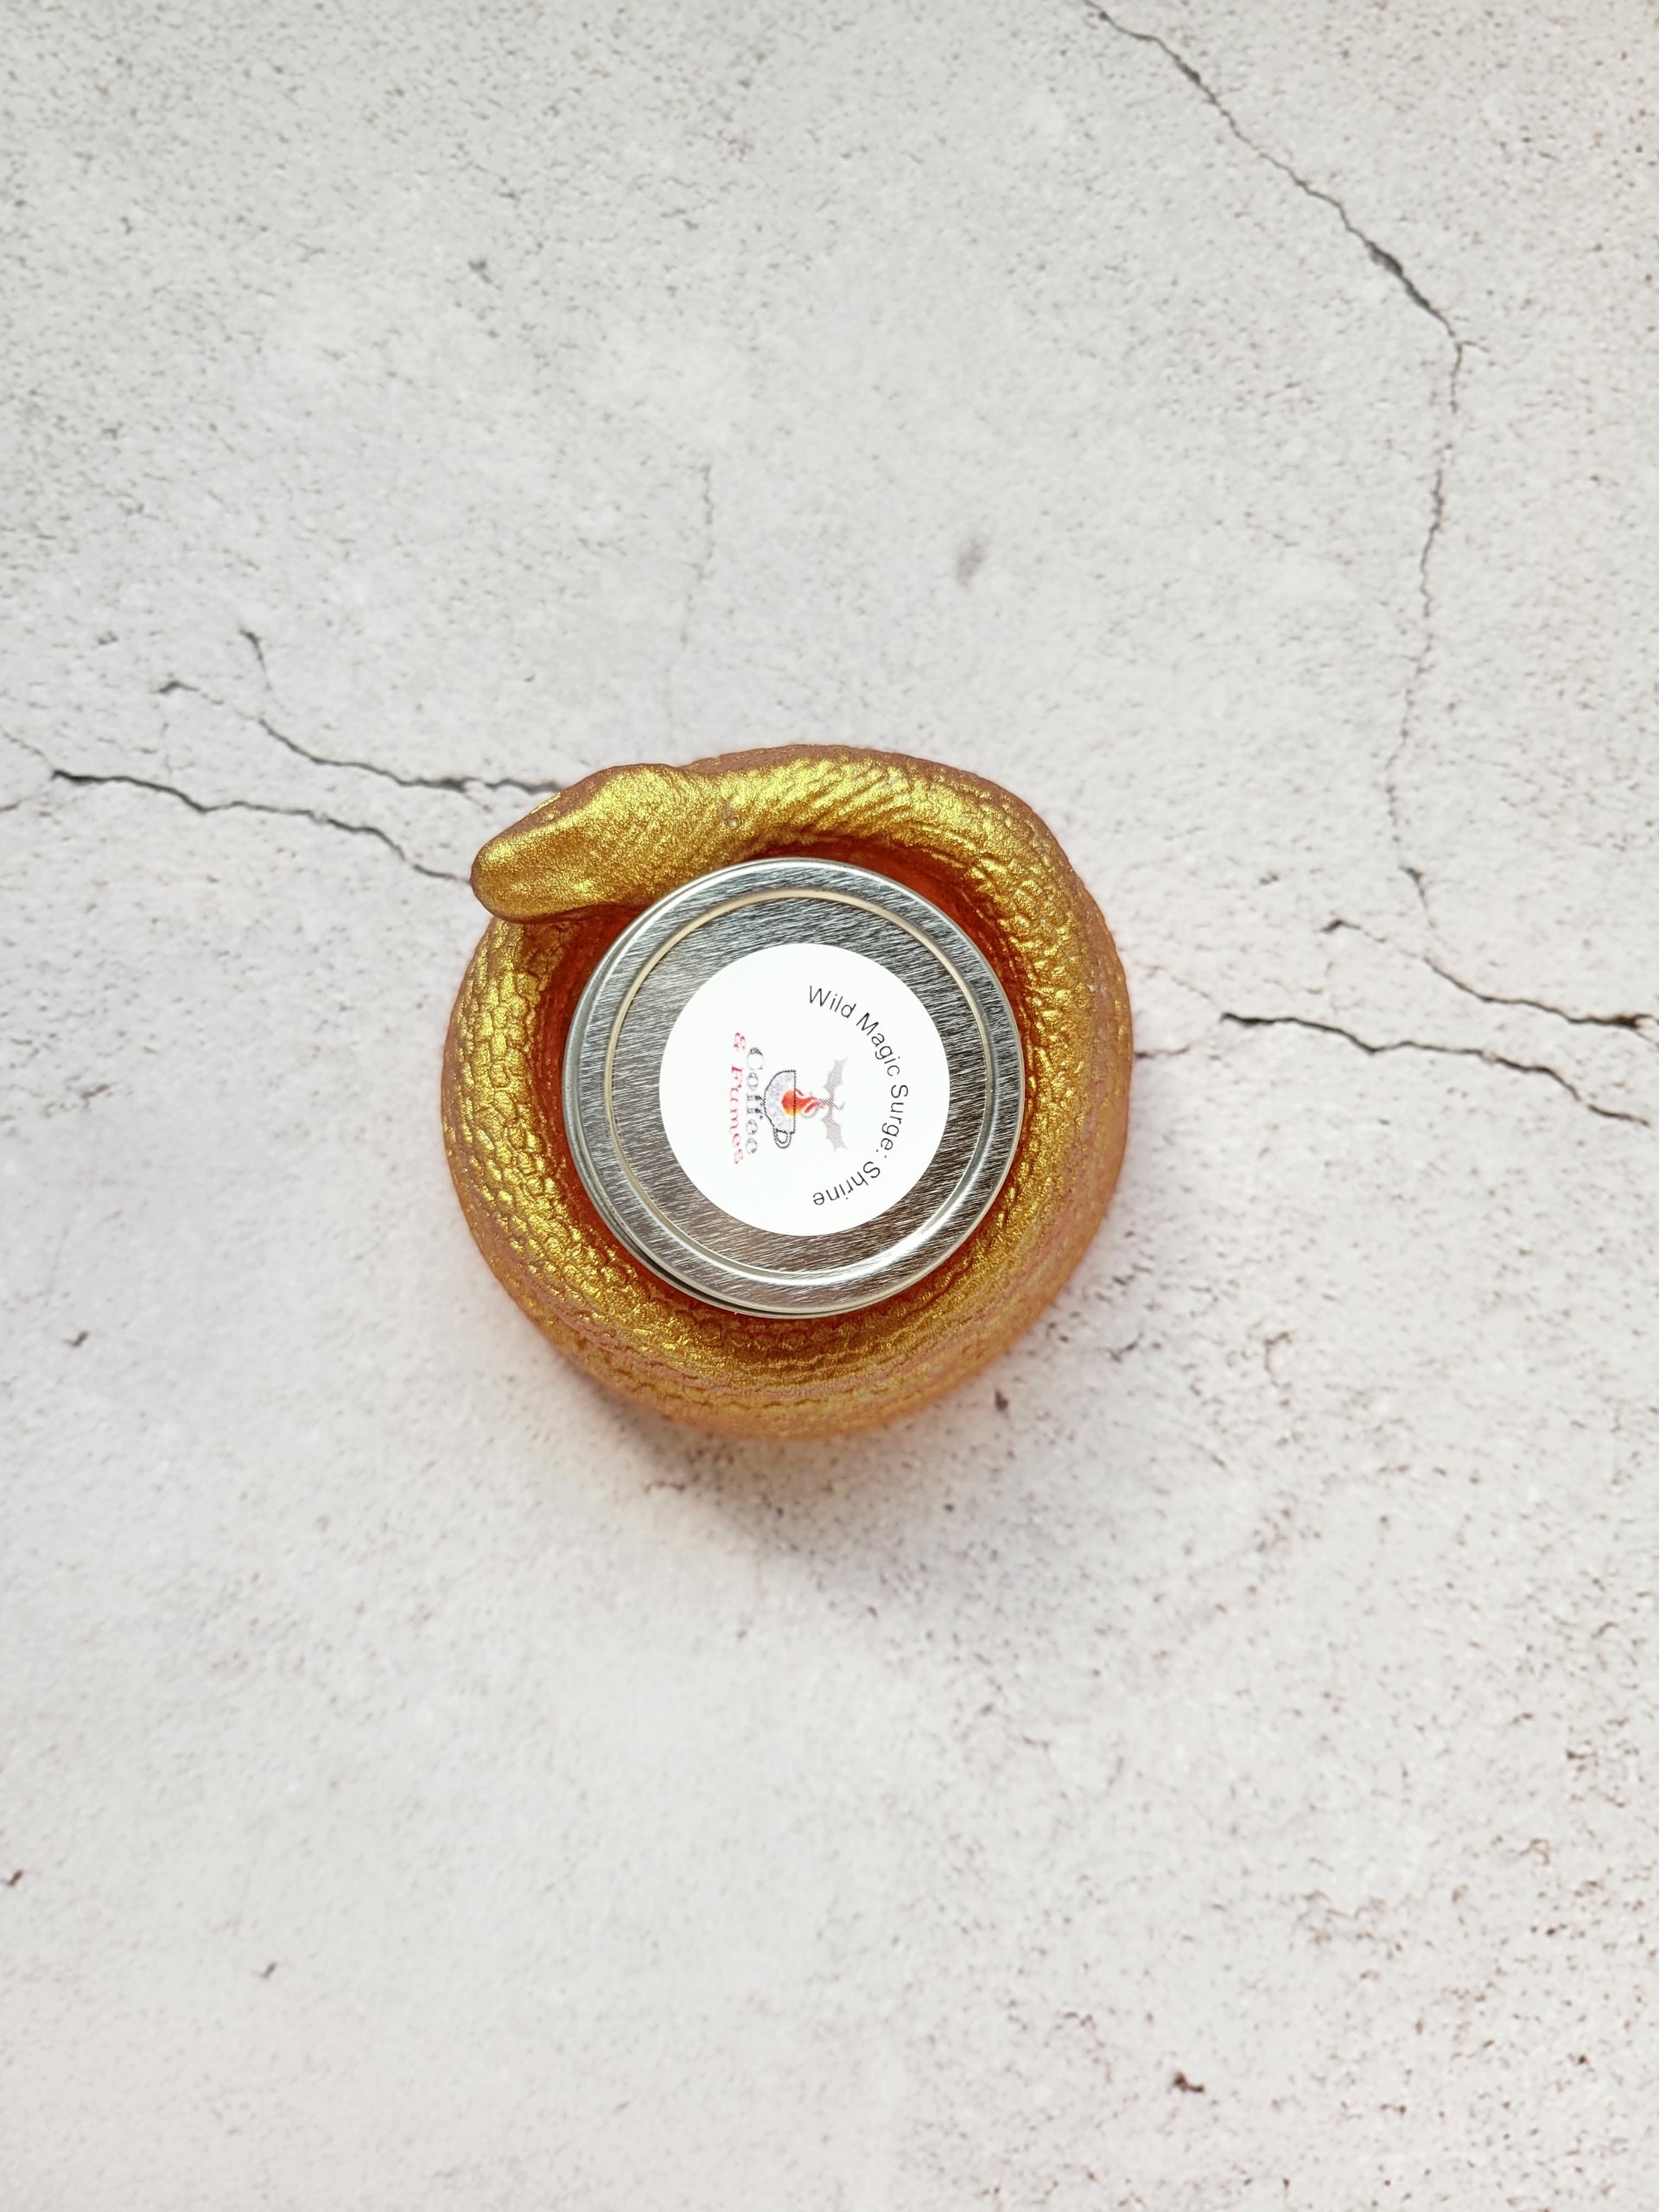 A top view of a tealight candle holder in the style of a coiled snake. It's a shimmering gold color. It has a tealight candle inside to show size comparison.